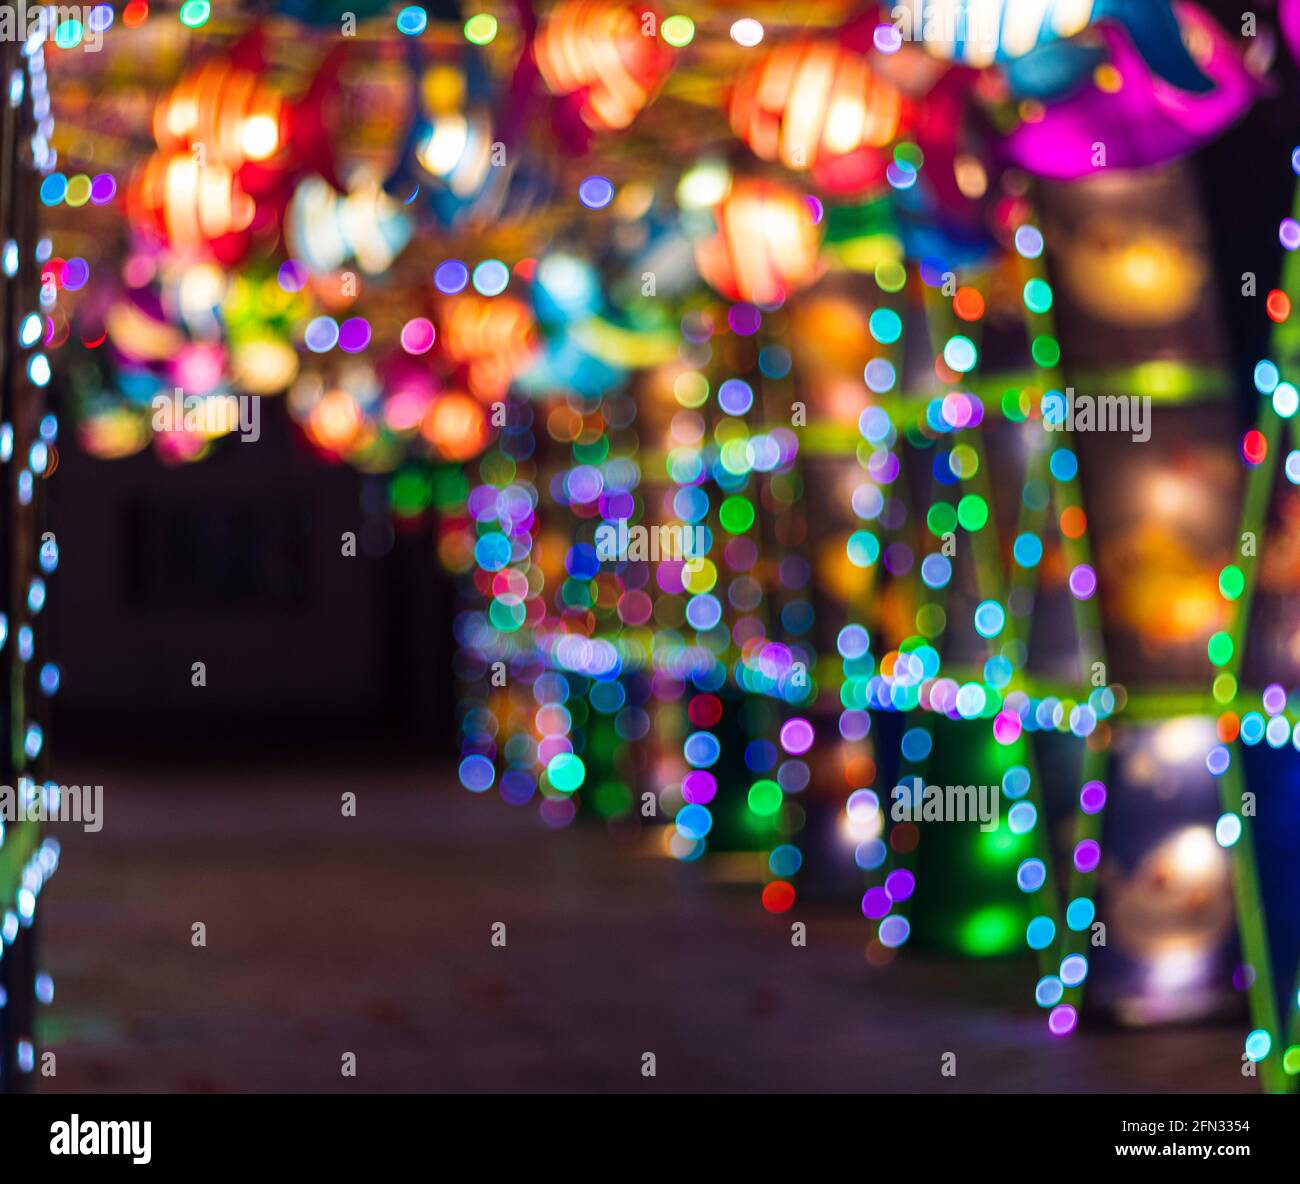 Shot of a colorful background with blurred lights Stock Photo - Alamy